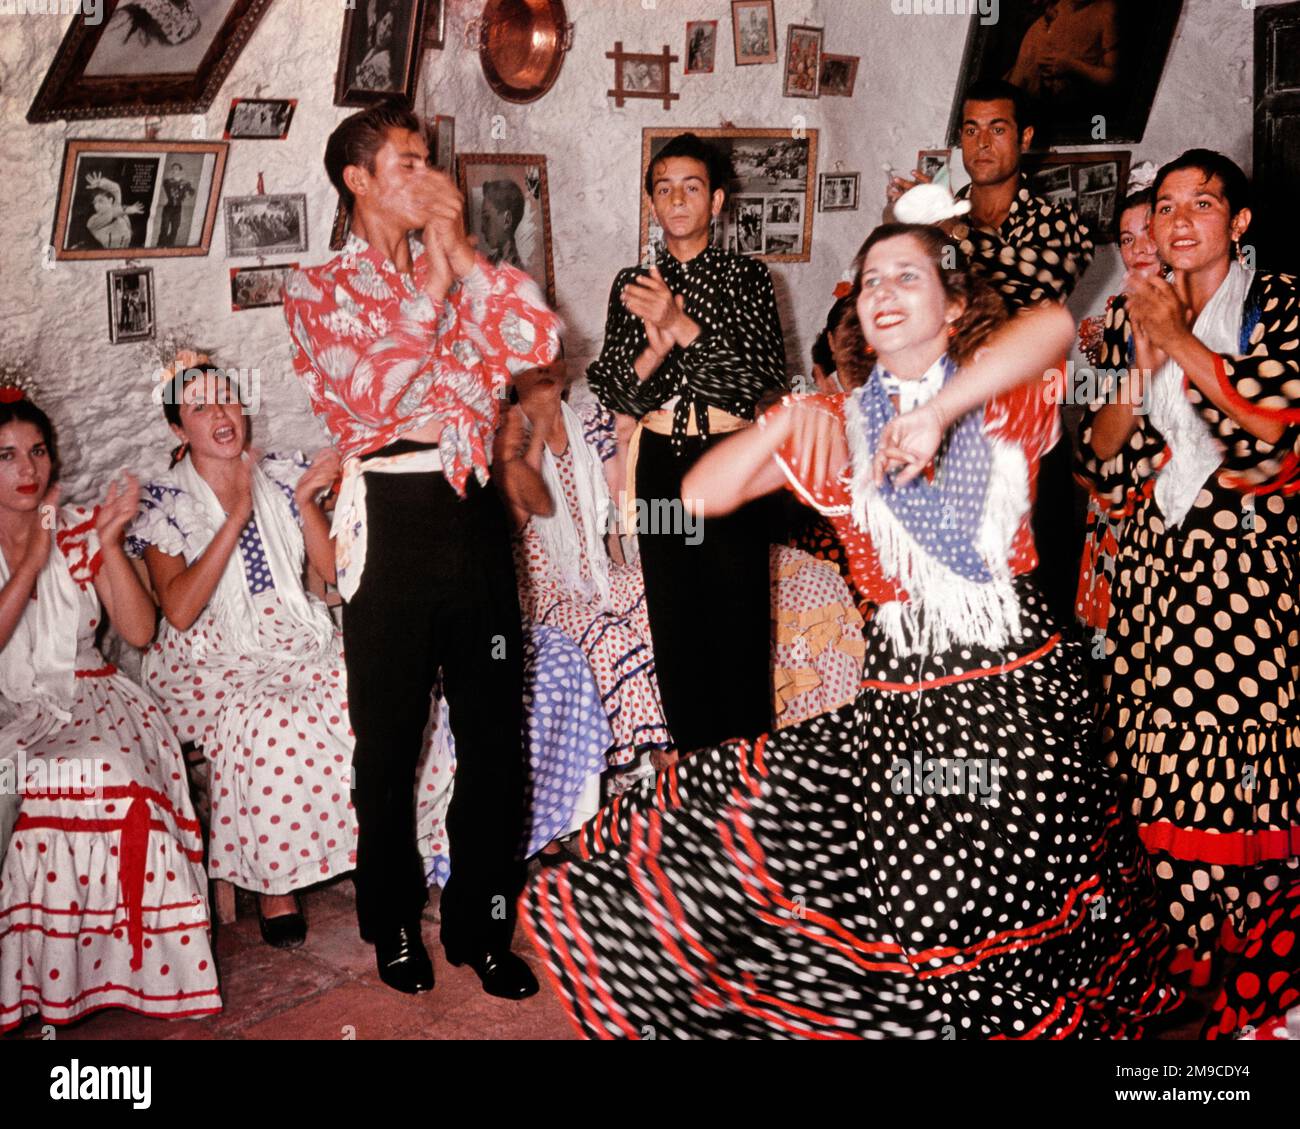 1940s 1950s PEOPLE DANCING FLAMENCO CLAPPING AND SINGING INSIDE ONE OF THE GYPSY CAVE HOMES OF SACROMONTE IN GRANADA SPAIN - kr8470 LAN001 HARS SATISFACTION CELEBRATION FEMALES CLAPPING RURAL HOME LIFE COPY SPACE FRIENDSHIP FULL-LENGTH HALF-LENGTH LADIES PERSONS INSPIRATION TRADITIONAL MALES ENTERTAINMENT CONFIDENCE EUROPE SPAIN PERFORMING ARTS GYPSY HAPPINESS EUROPEAN AND EXCITEMENT RECREATION SONG TRADITION VOCAL PRIDE CAVE ENTERTAINER HOMES MOTION BLUR VOCALIZE POLKA DOT VOCALS CULTURE ESTABLISHED SONGS STYLISH WHITEWASHED COOPERATION JOYOUS YOUNG ADULT MAN YOUNG ADULT WOMAN OLD FASHIONED Stock Photo